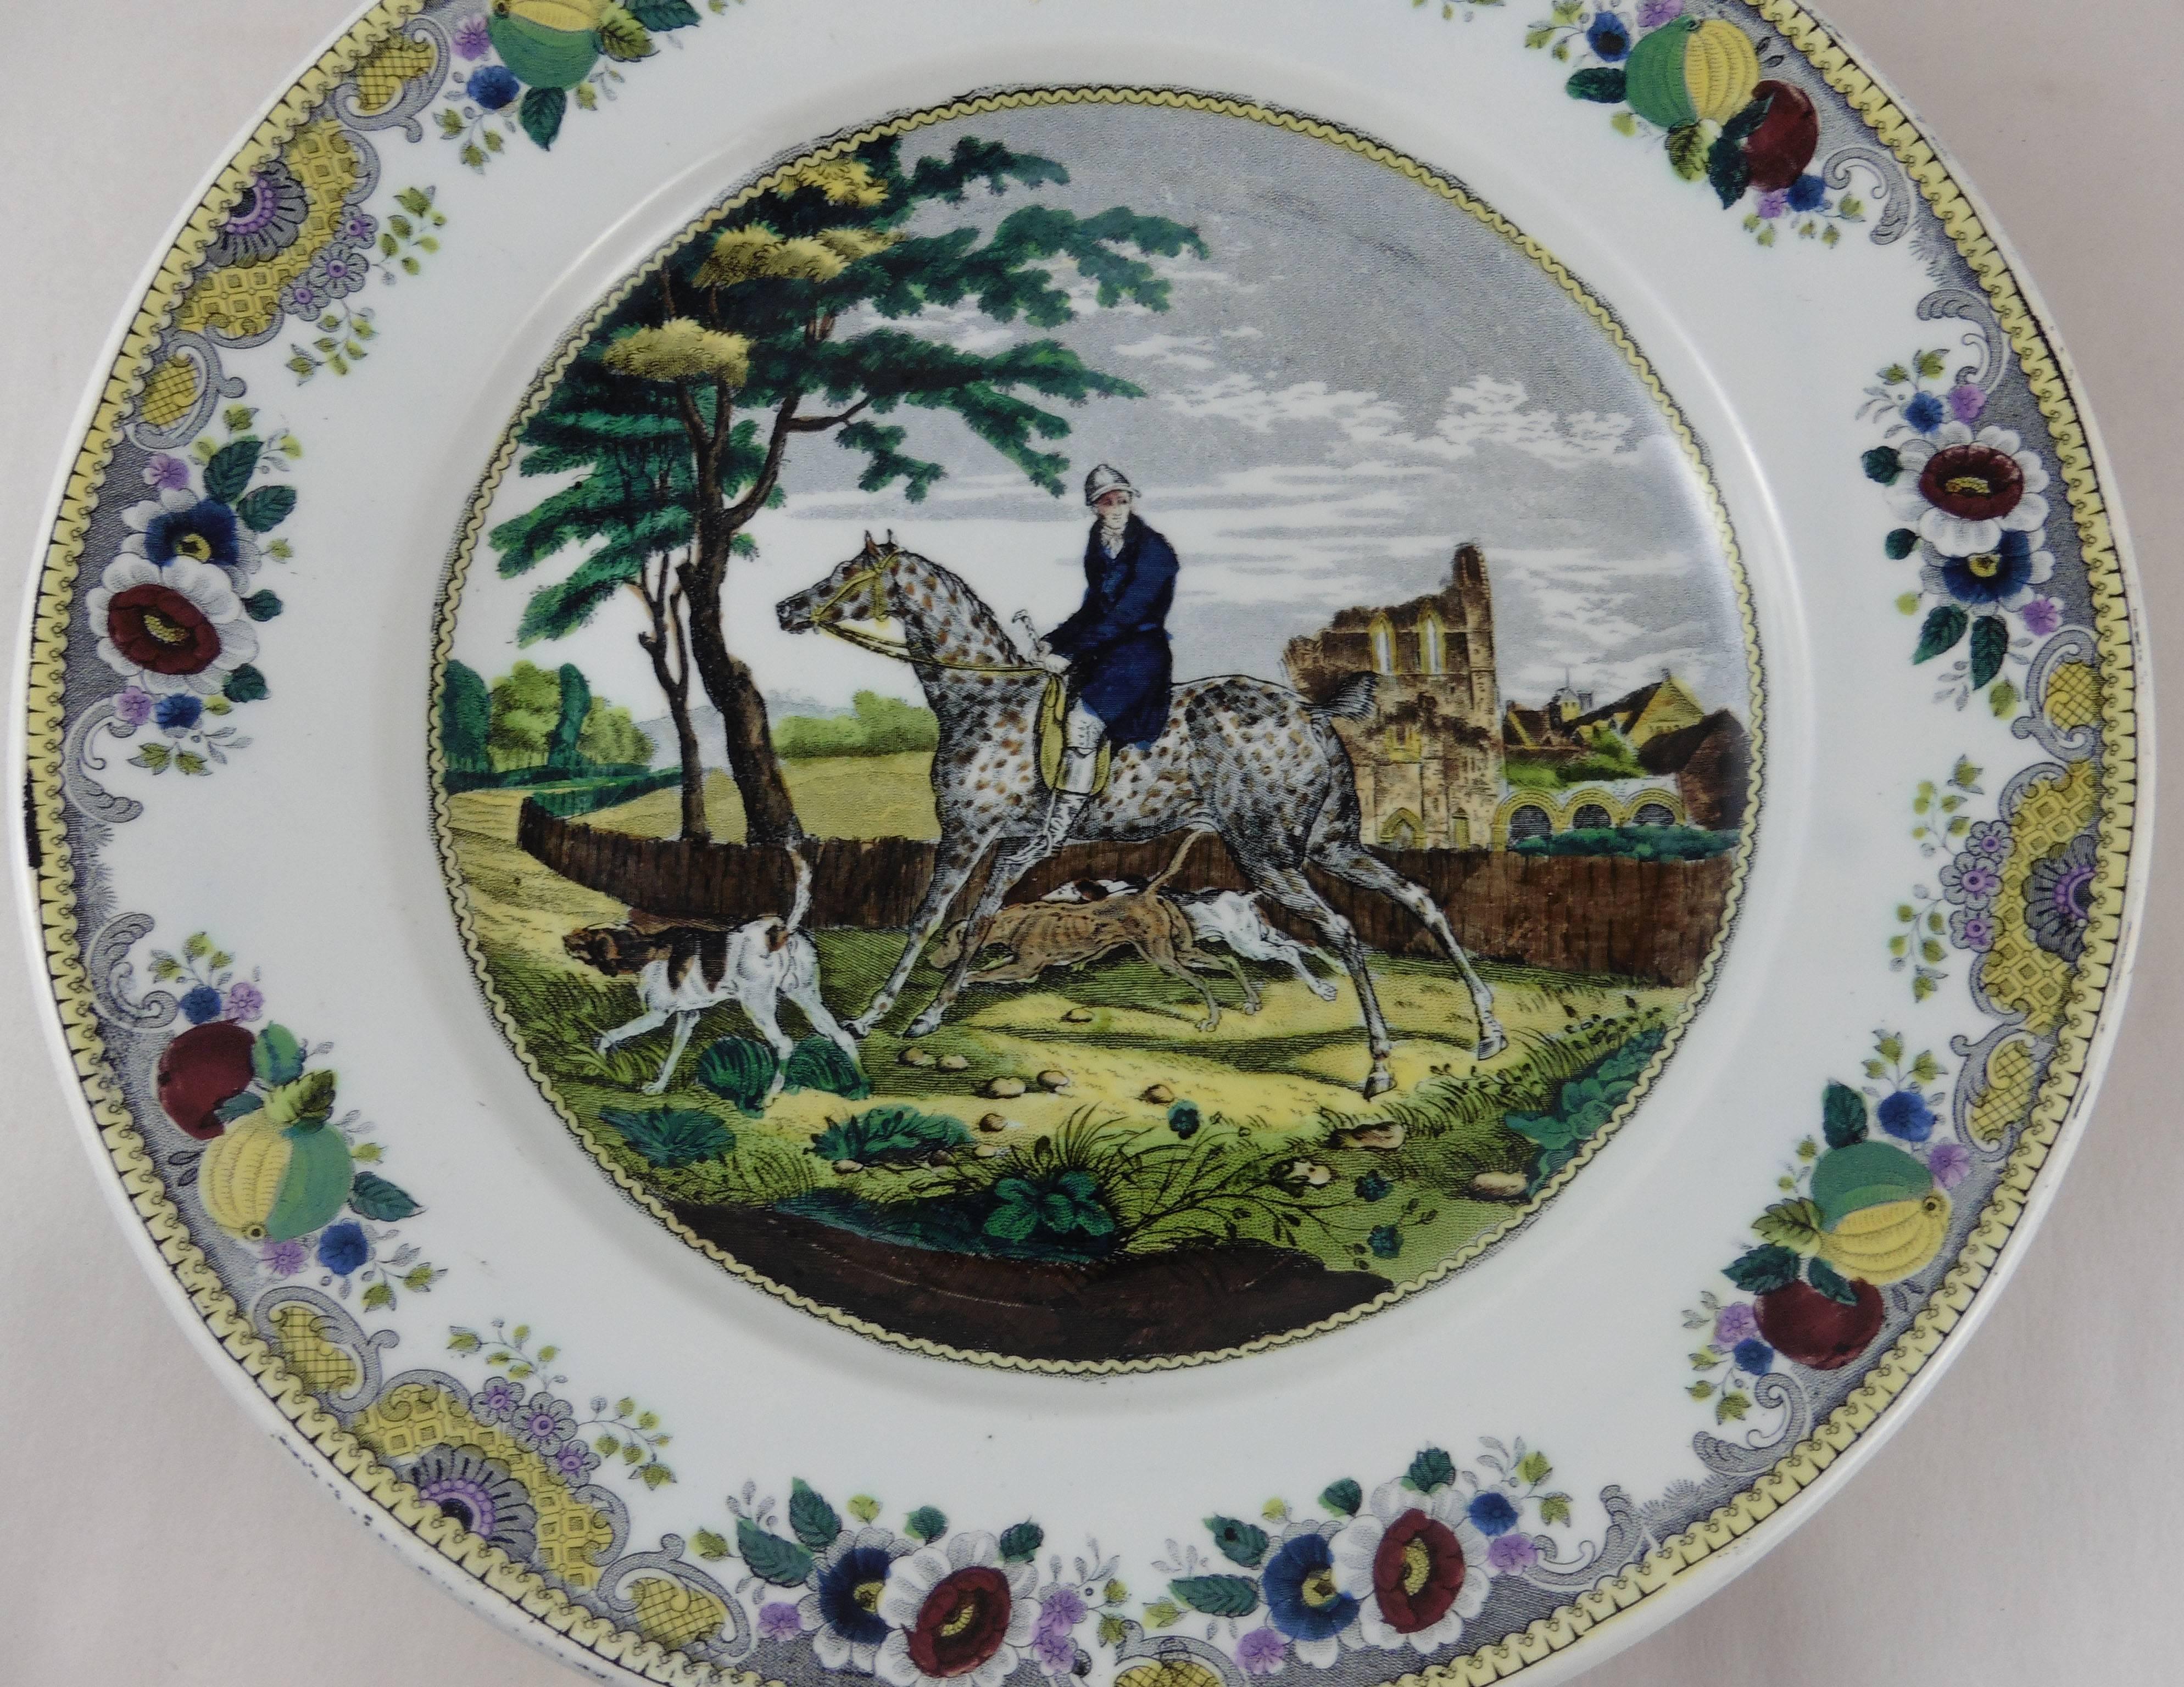 Early French polychrome transferware platter with hunt scene horseman and his dogs signed Hippolyte Boulenger for the manufacture of Choisy le roi, circa 1840.
The platter edges area is decorated with fruits and flowers.
   